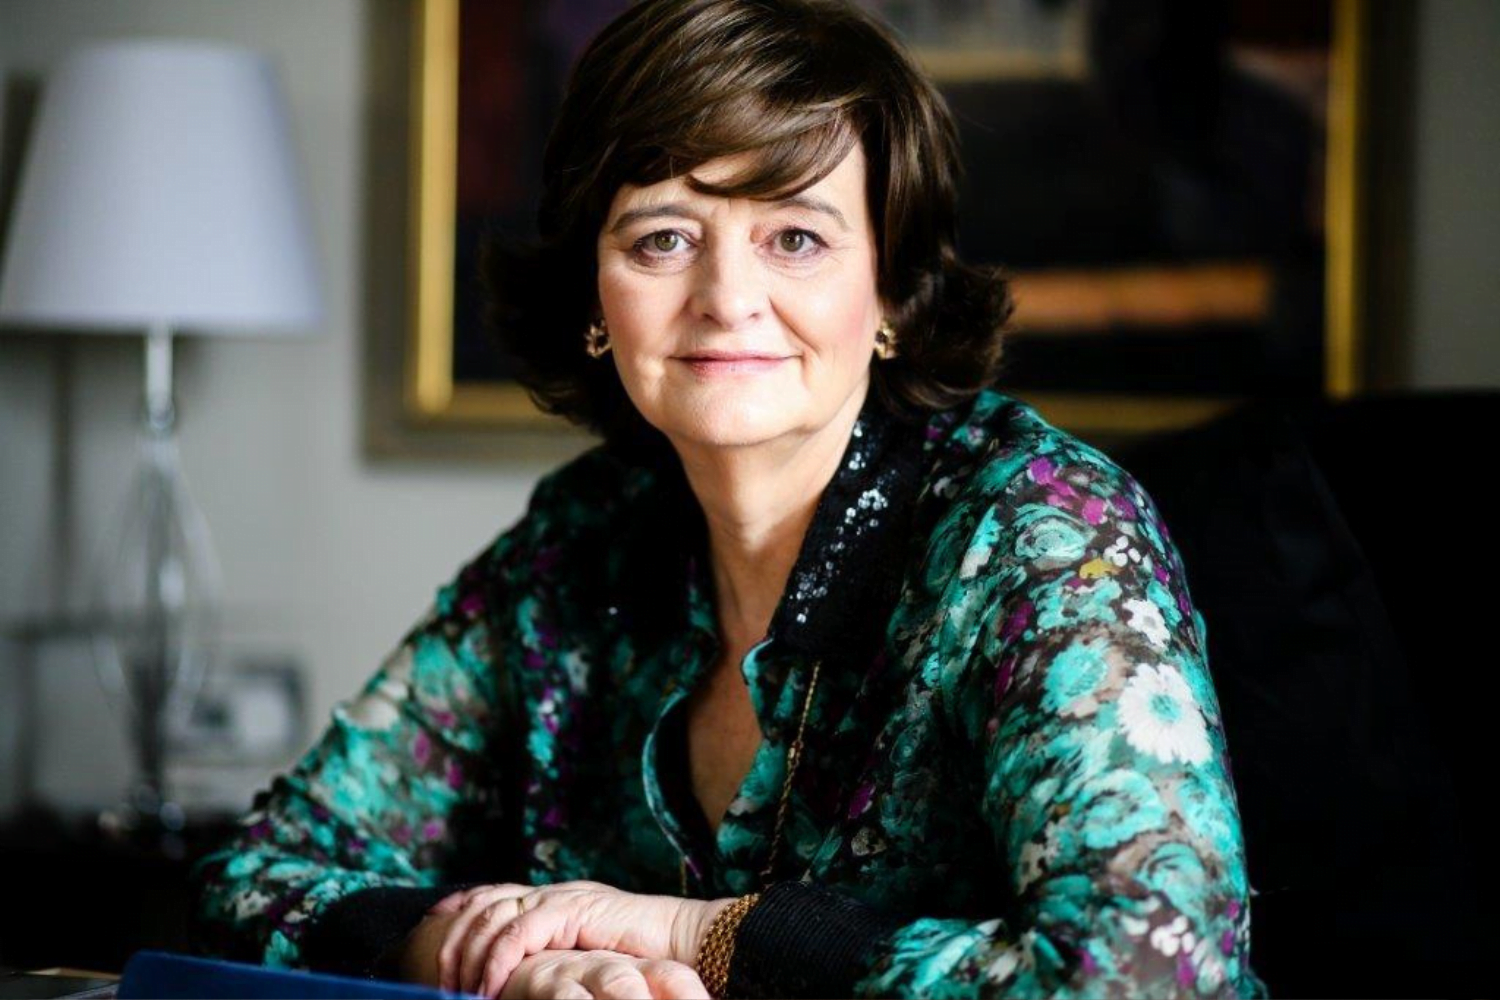 Cherie Blair, CBE KC, sits with her arms crossed on a desk. She is wearing a black blouse with teal flowers on it. In the background is a painting in a large gold frame and a white lamp.